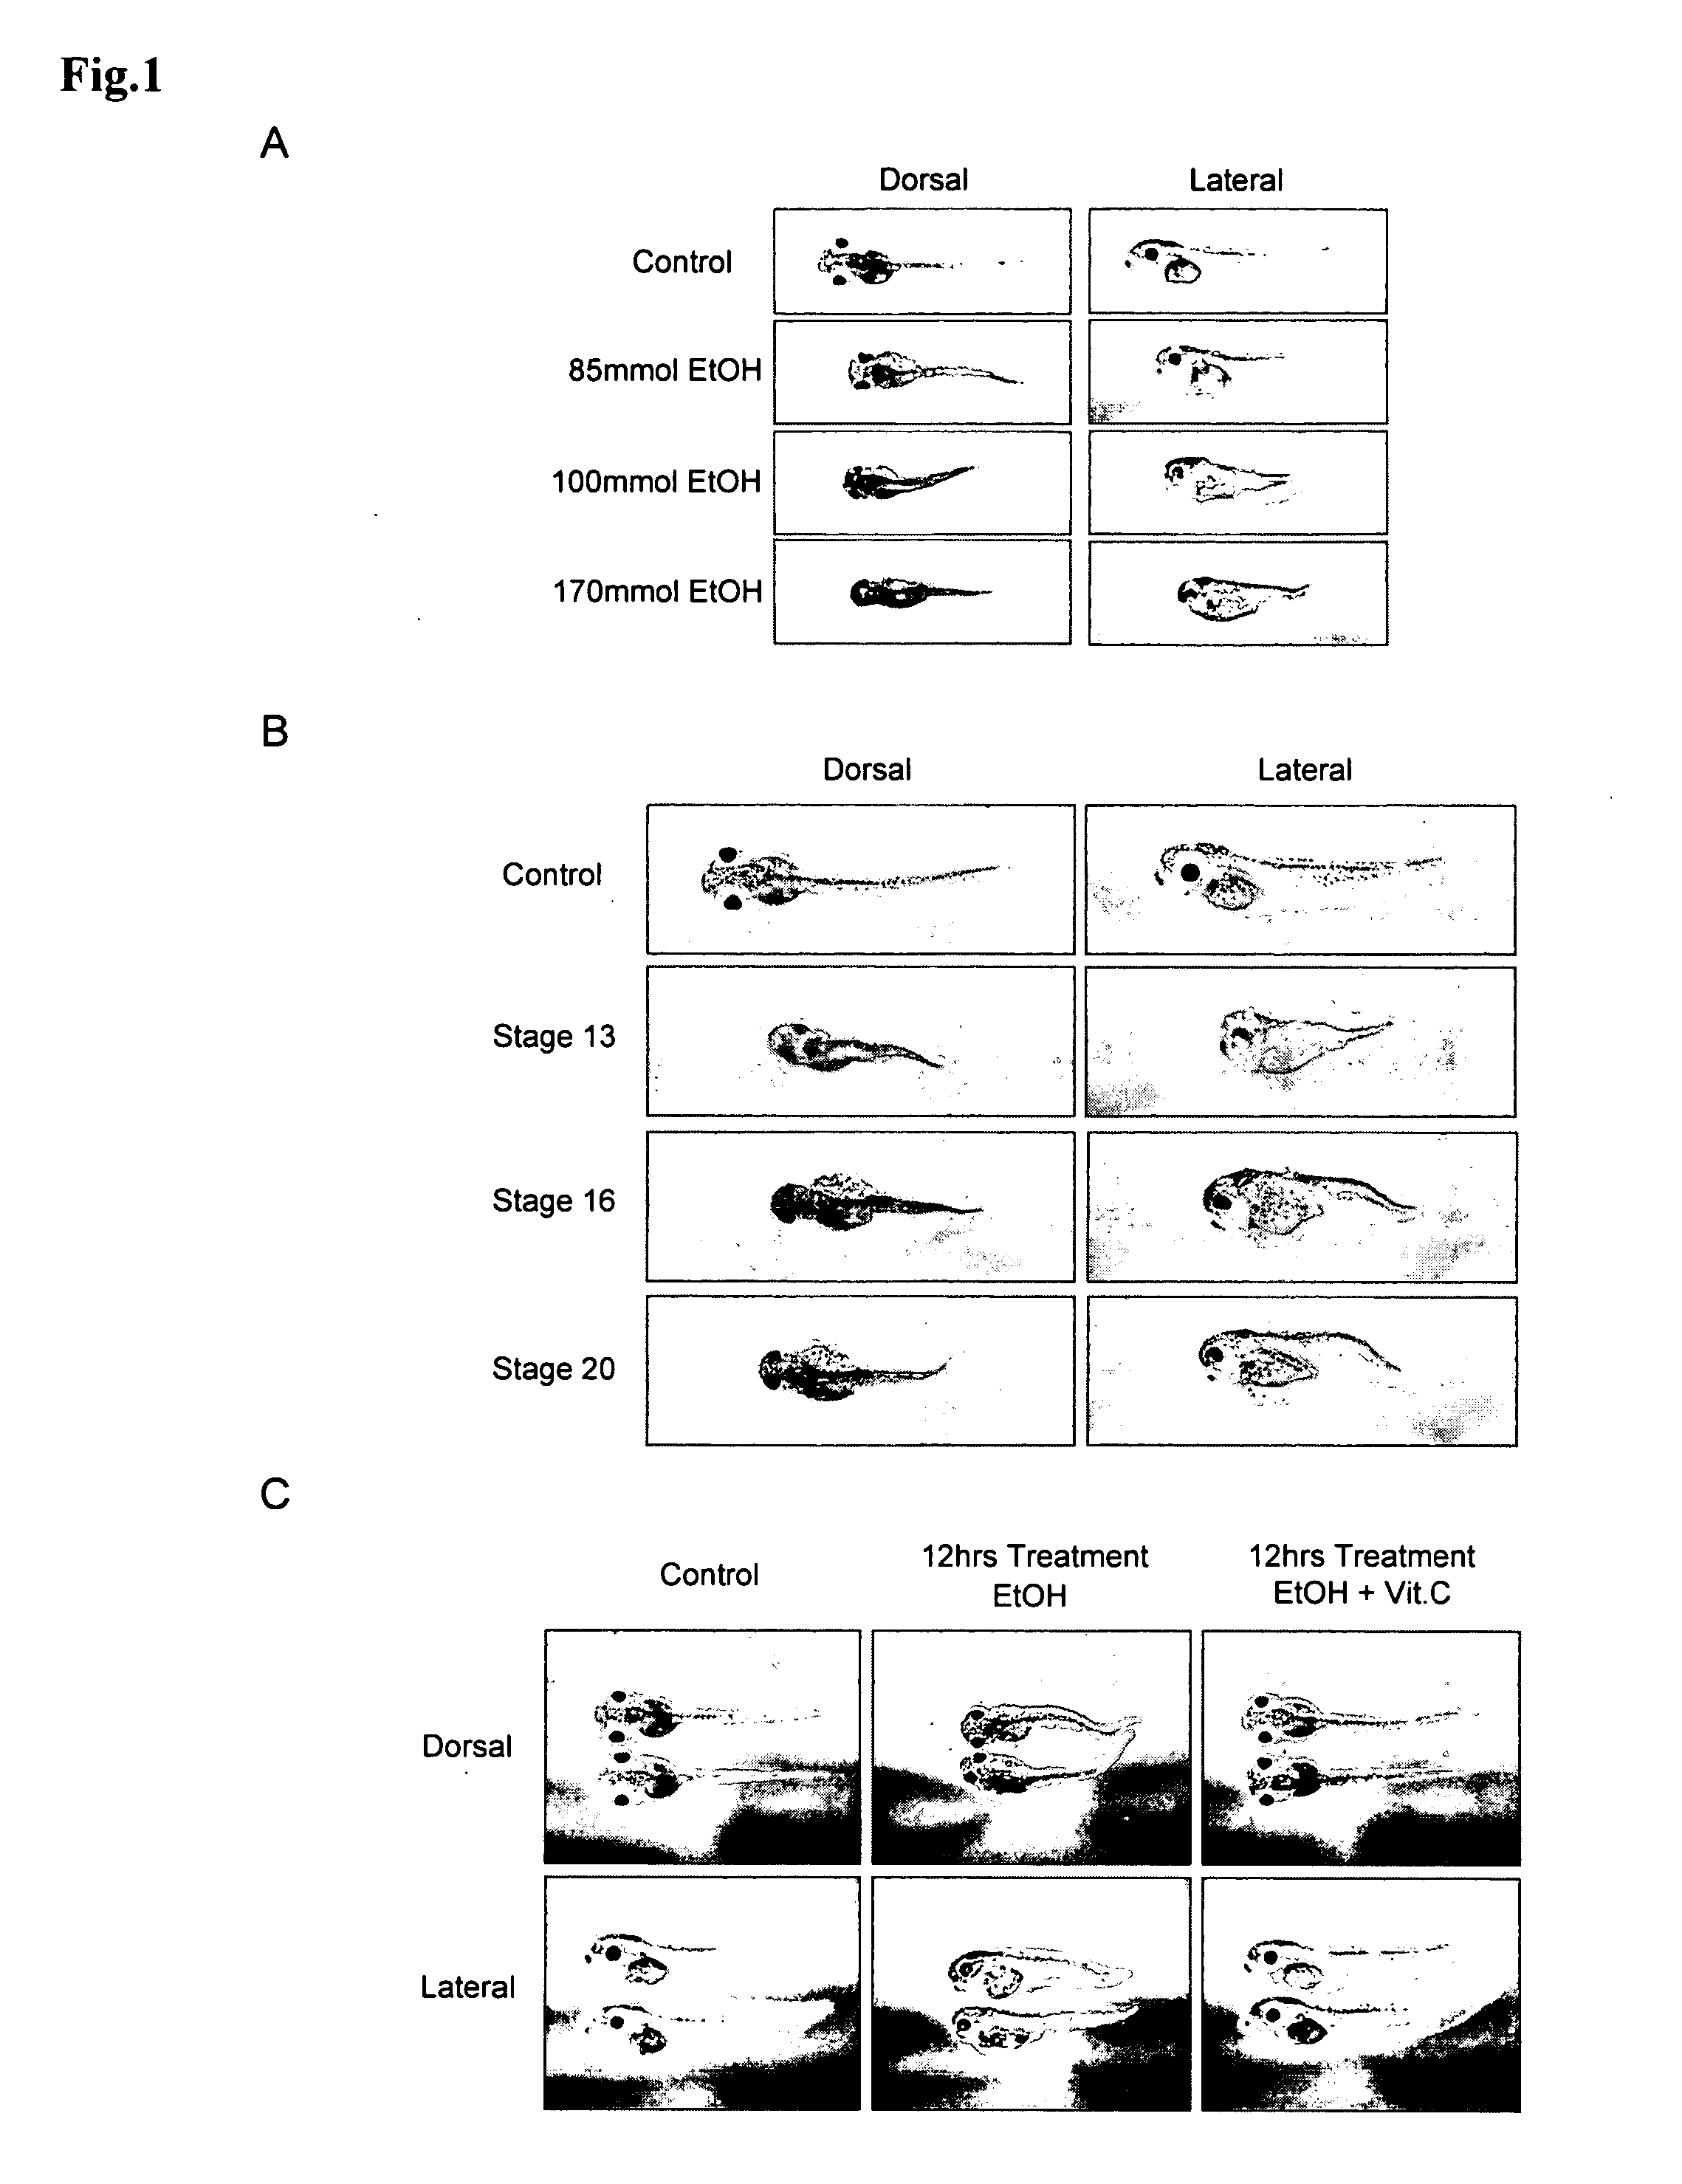 Animal model for fetal alcohol syndrome and methods of treatment